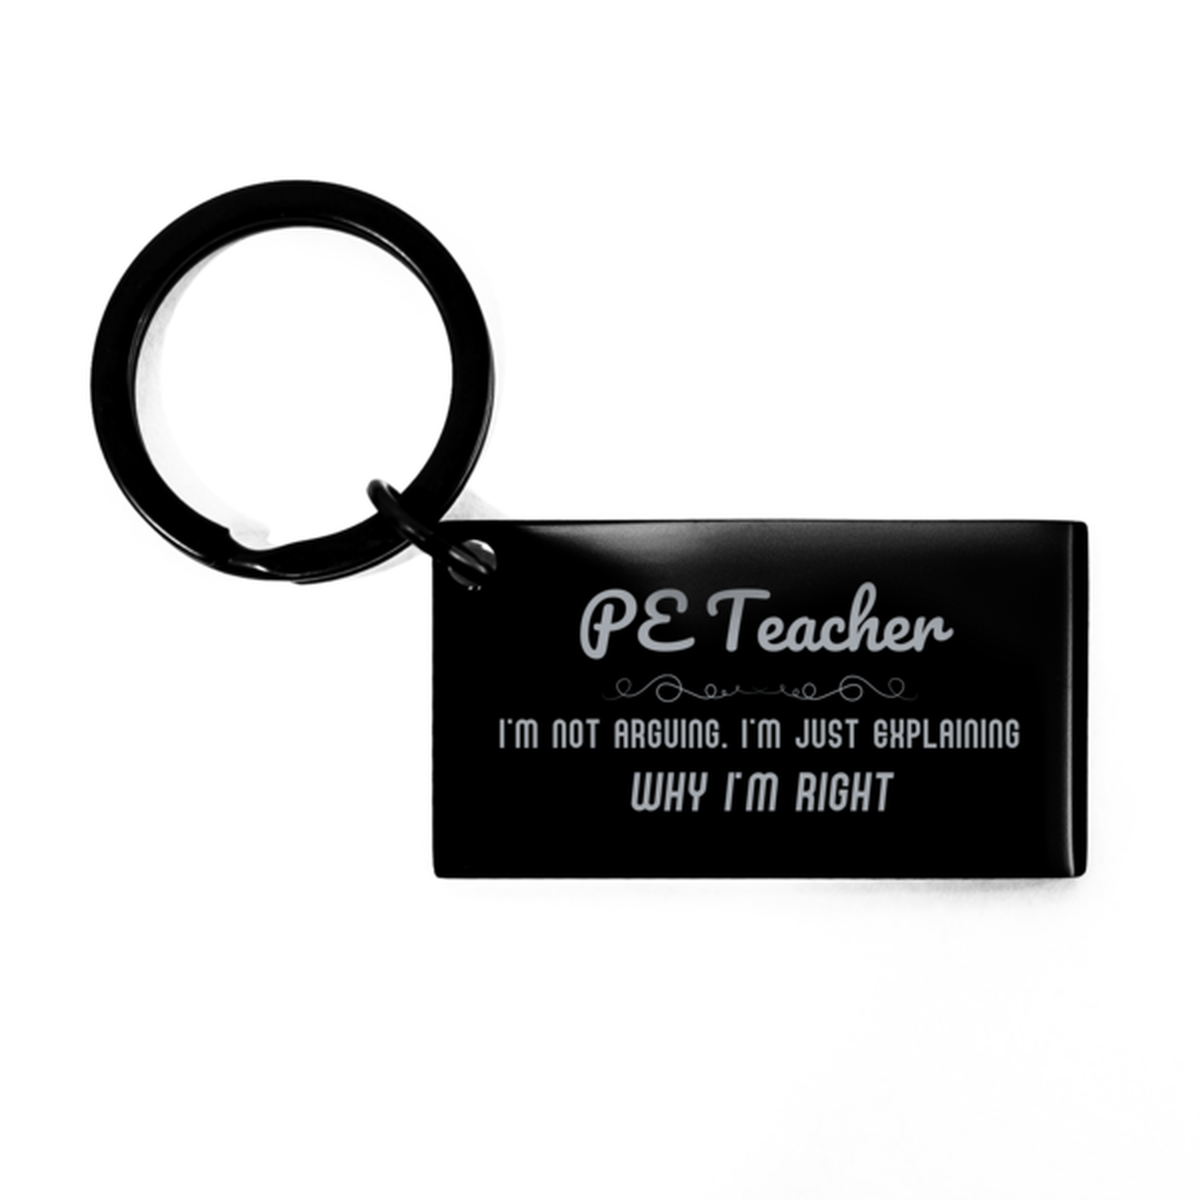 PE Teacher I'm not Arguing. I'm Just Explaining Why I'm RIGHT Keychain, Funny Saying Quote PE Teacher Gifts For PE Teacher Graduation Birthday Christmas Gifts for Men Women Coworker